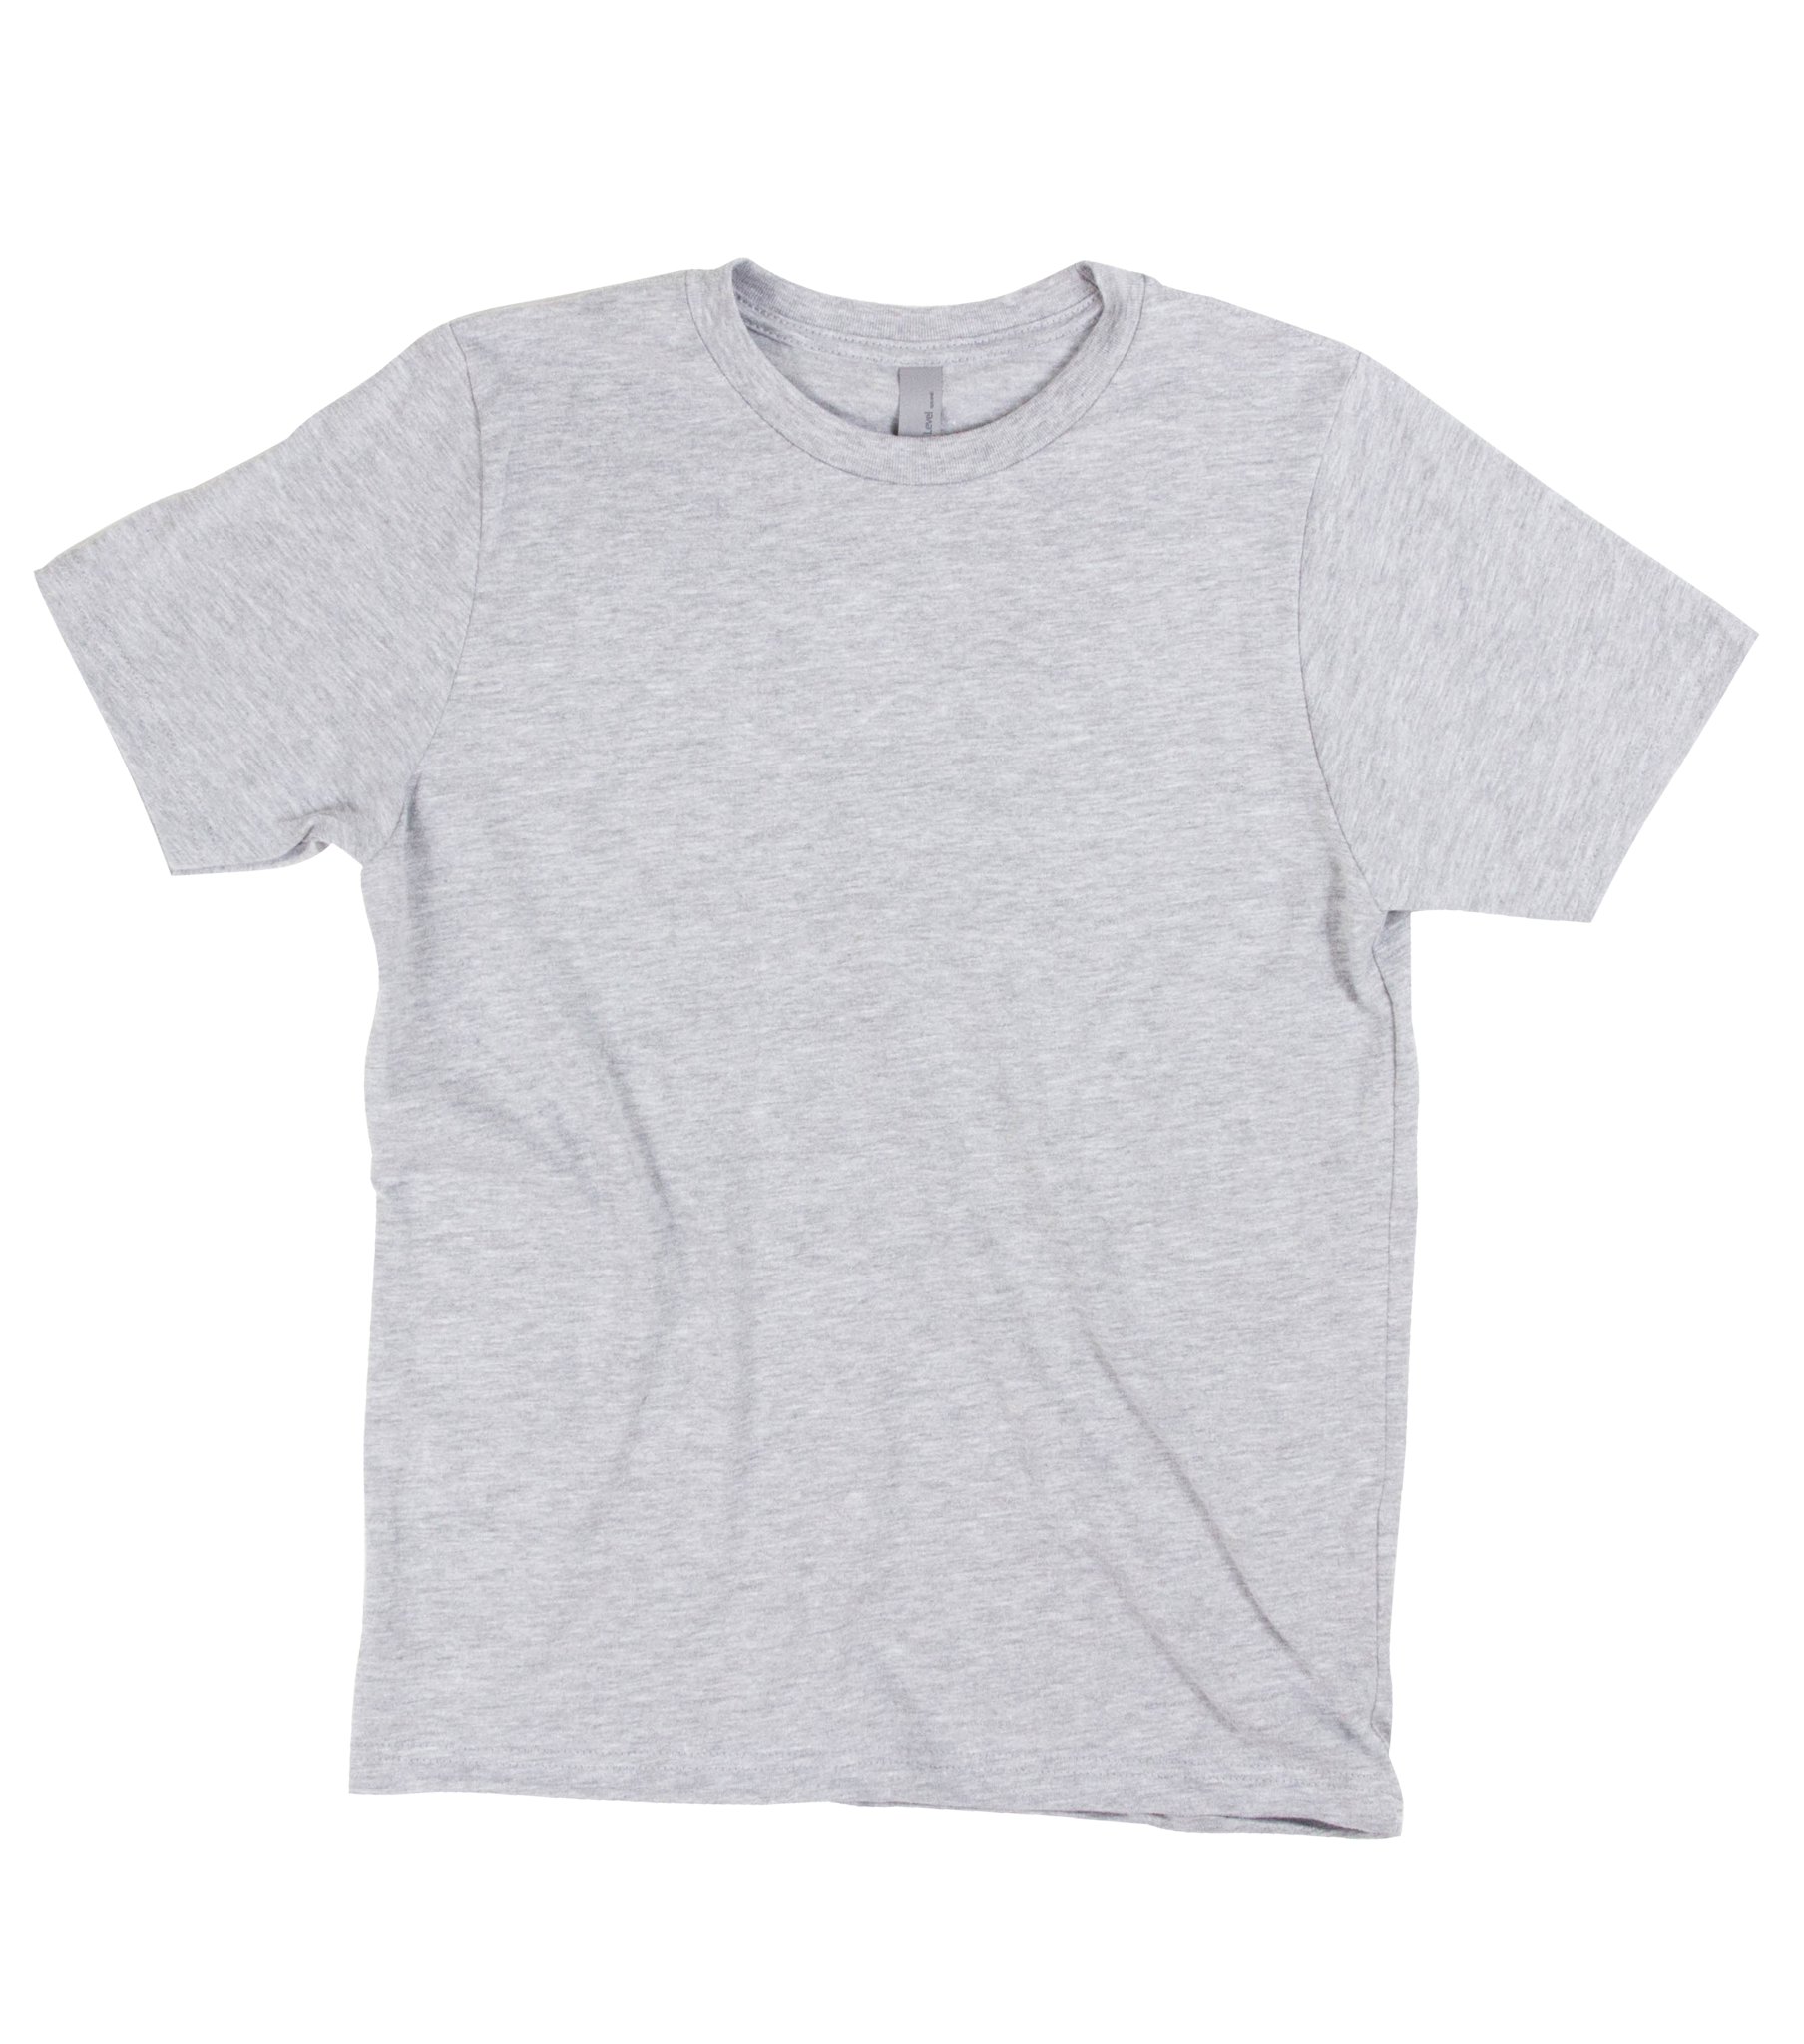 plain gray t shirt front and back